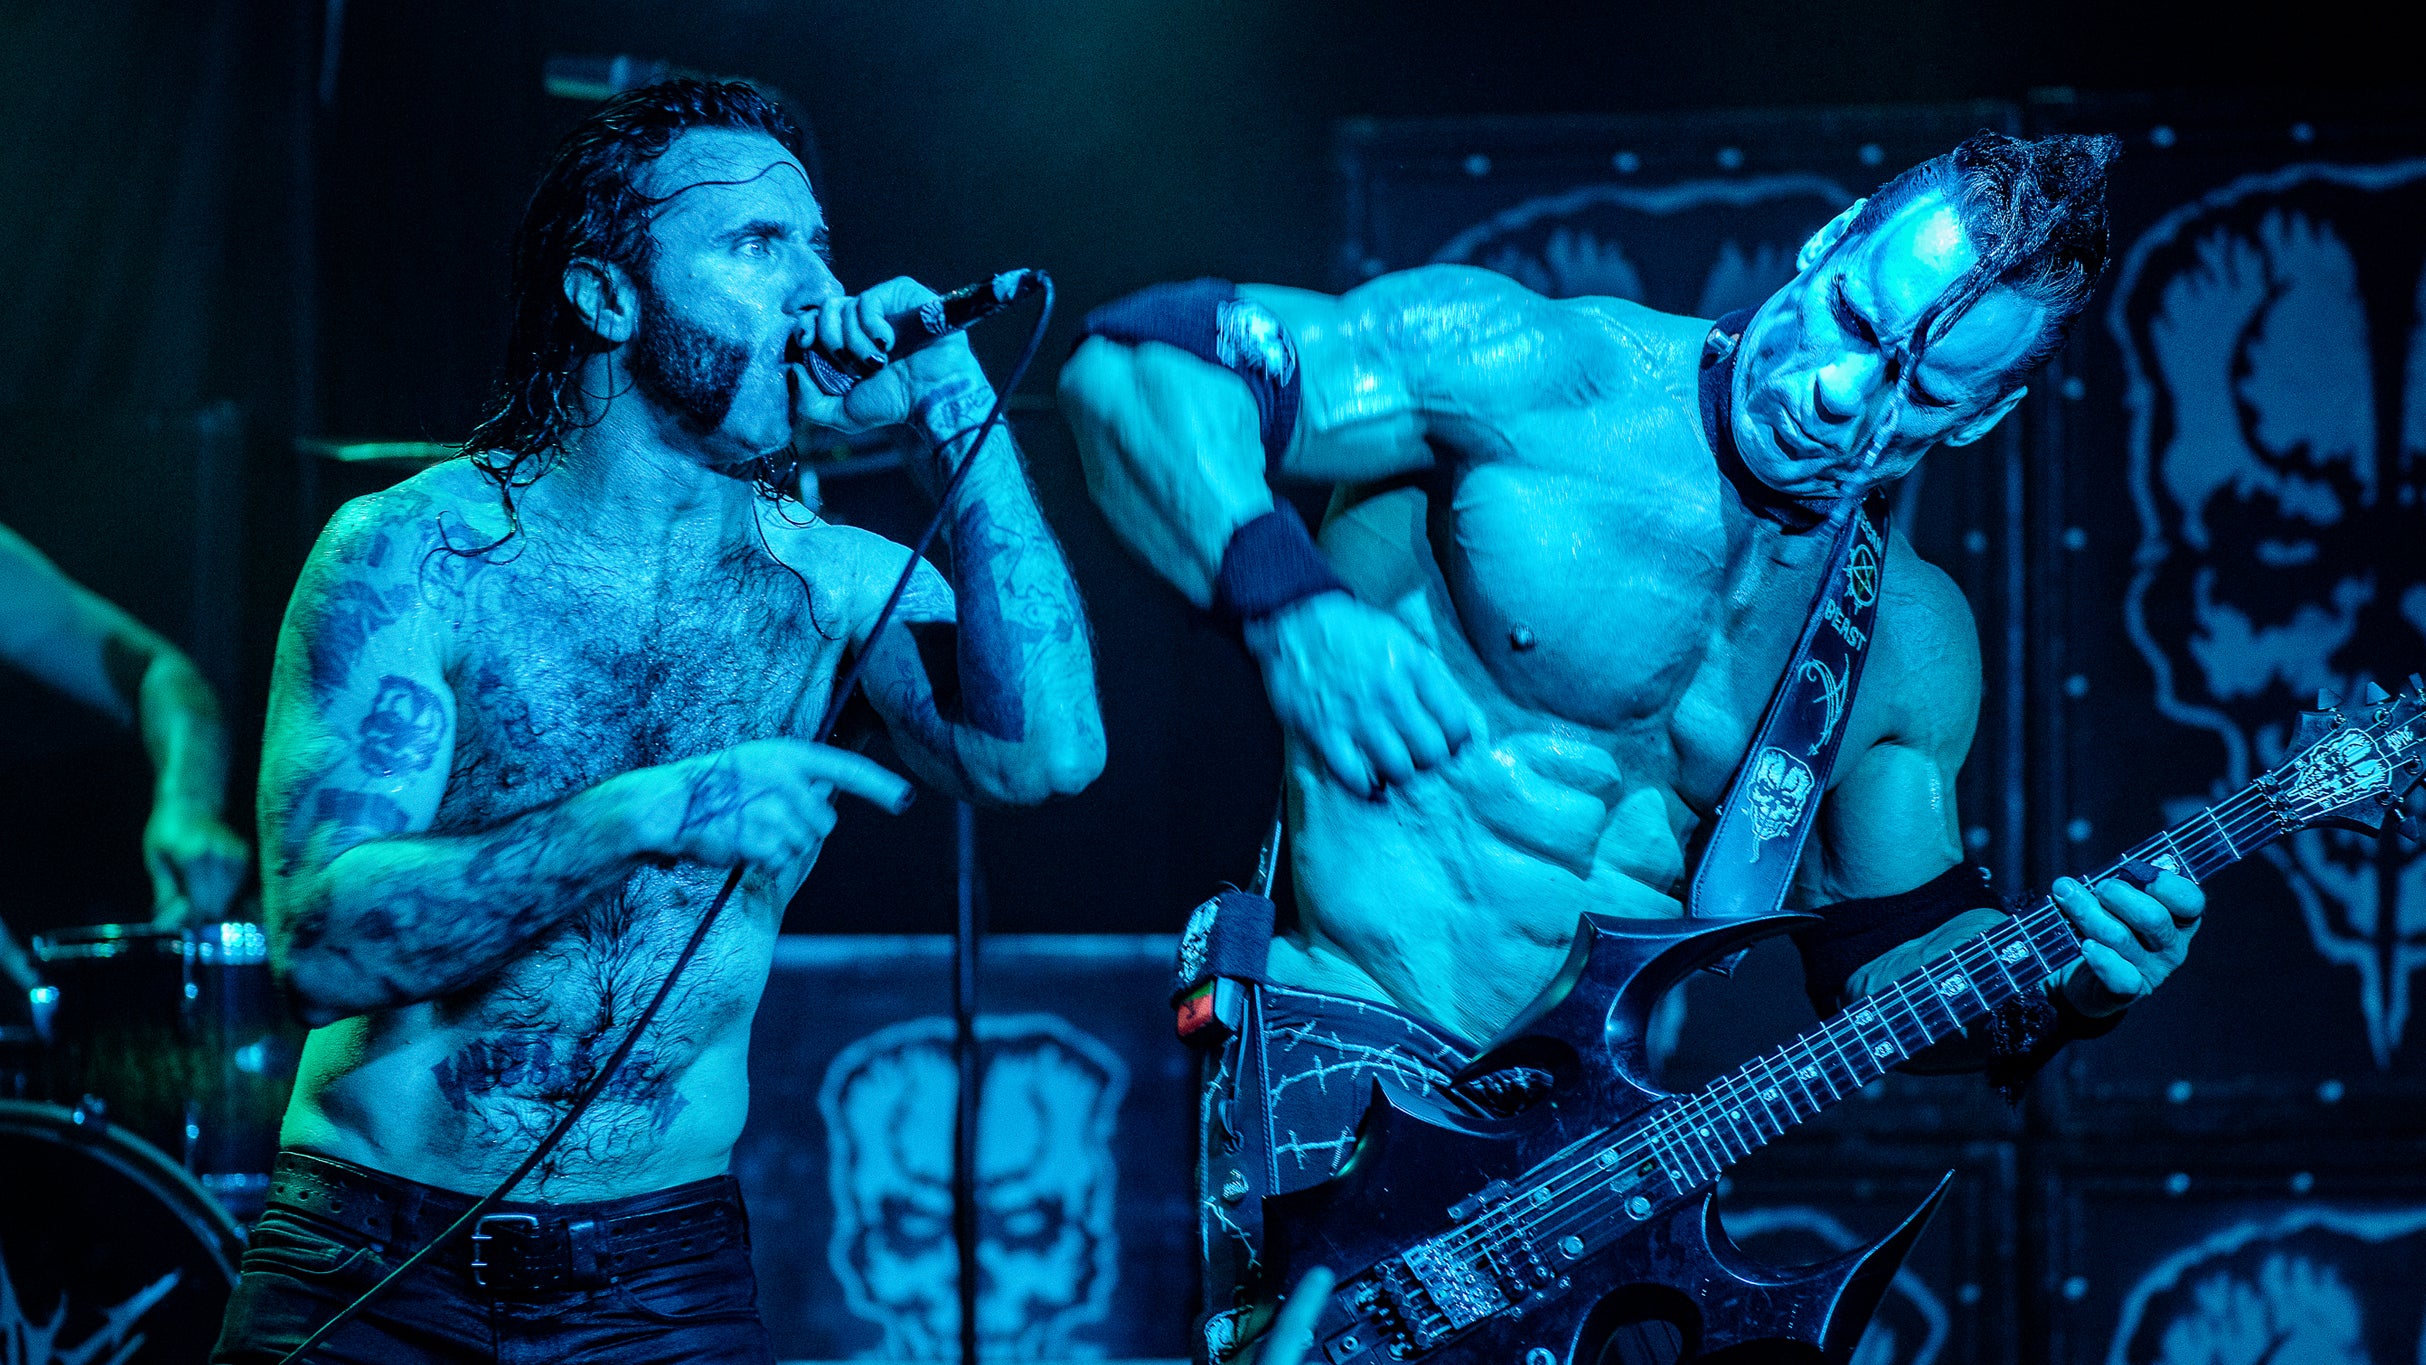 Doyle + Otep at Reverb